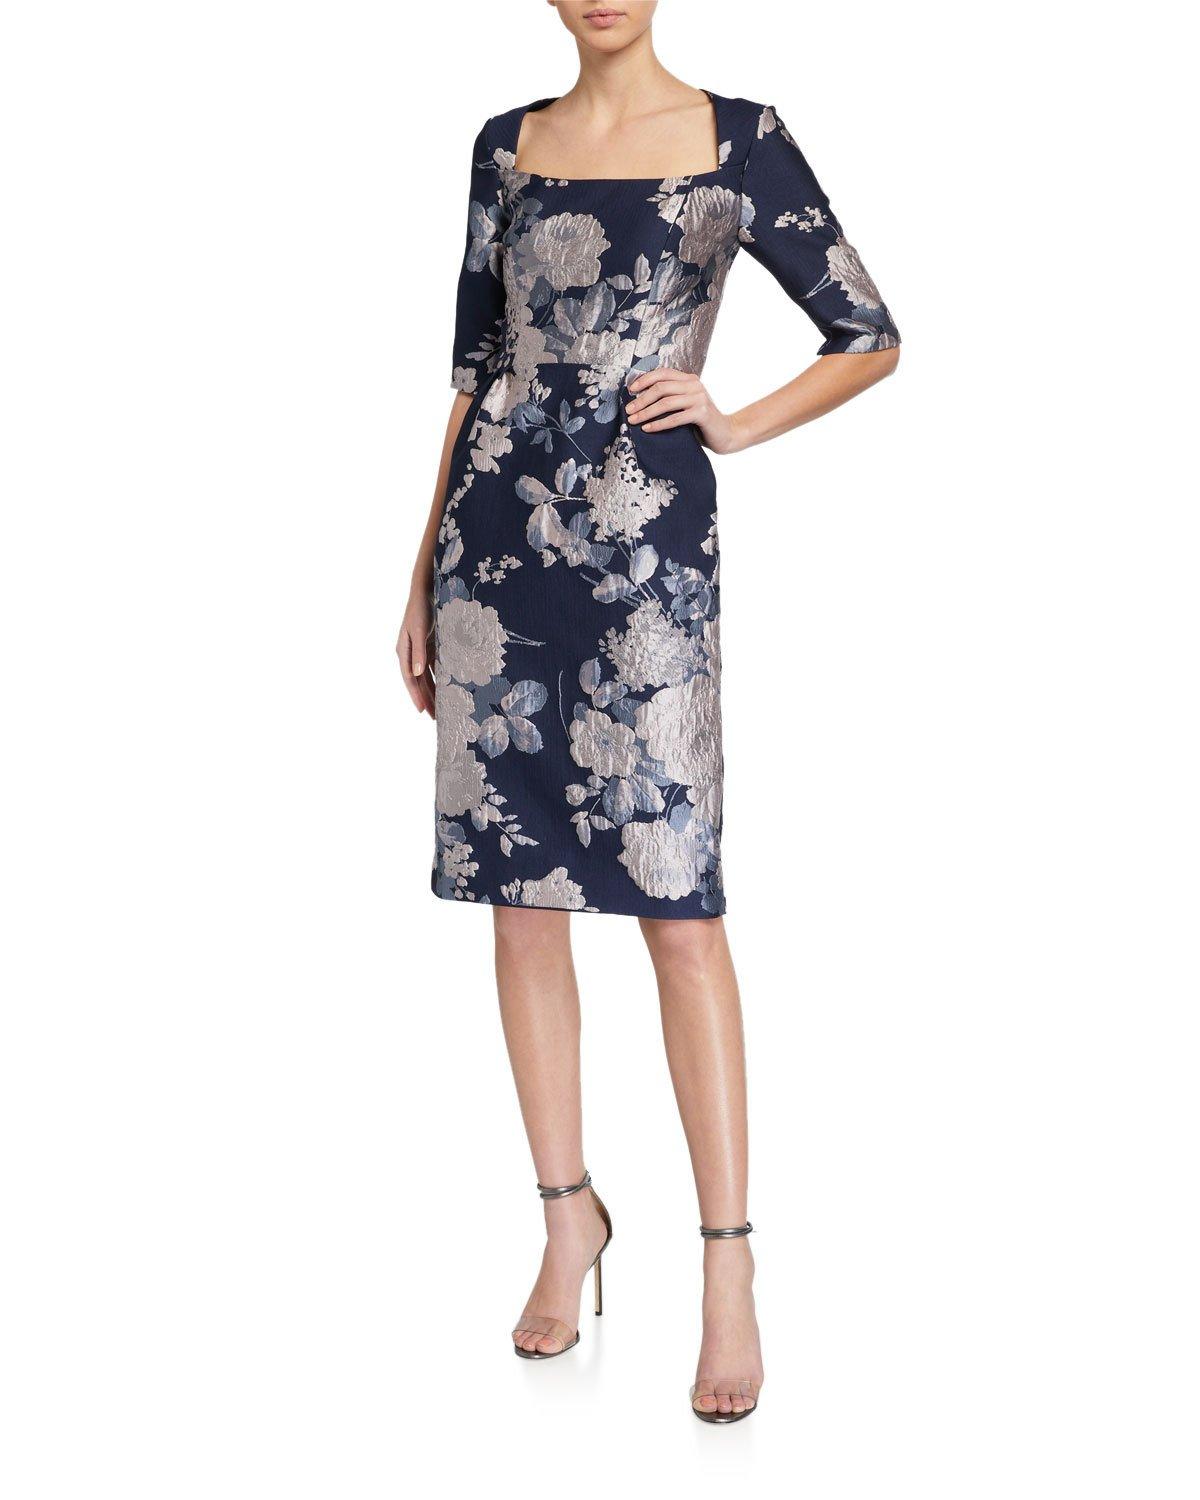 Kay Unger Synthetic Floral Jacquard Sheath Dress in Blue - Lyst